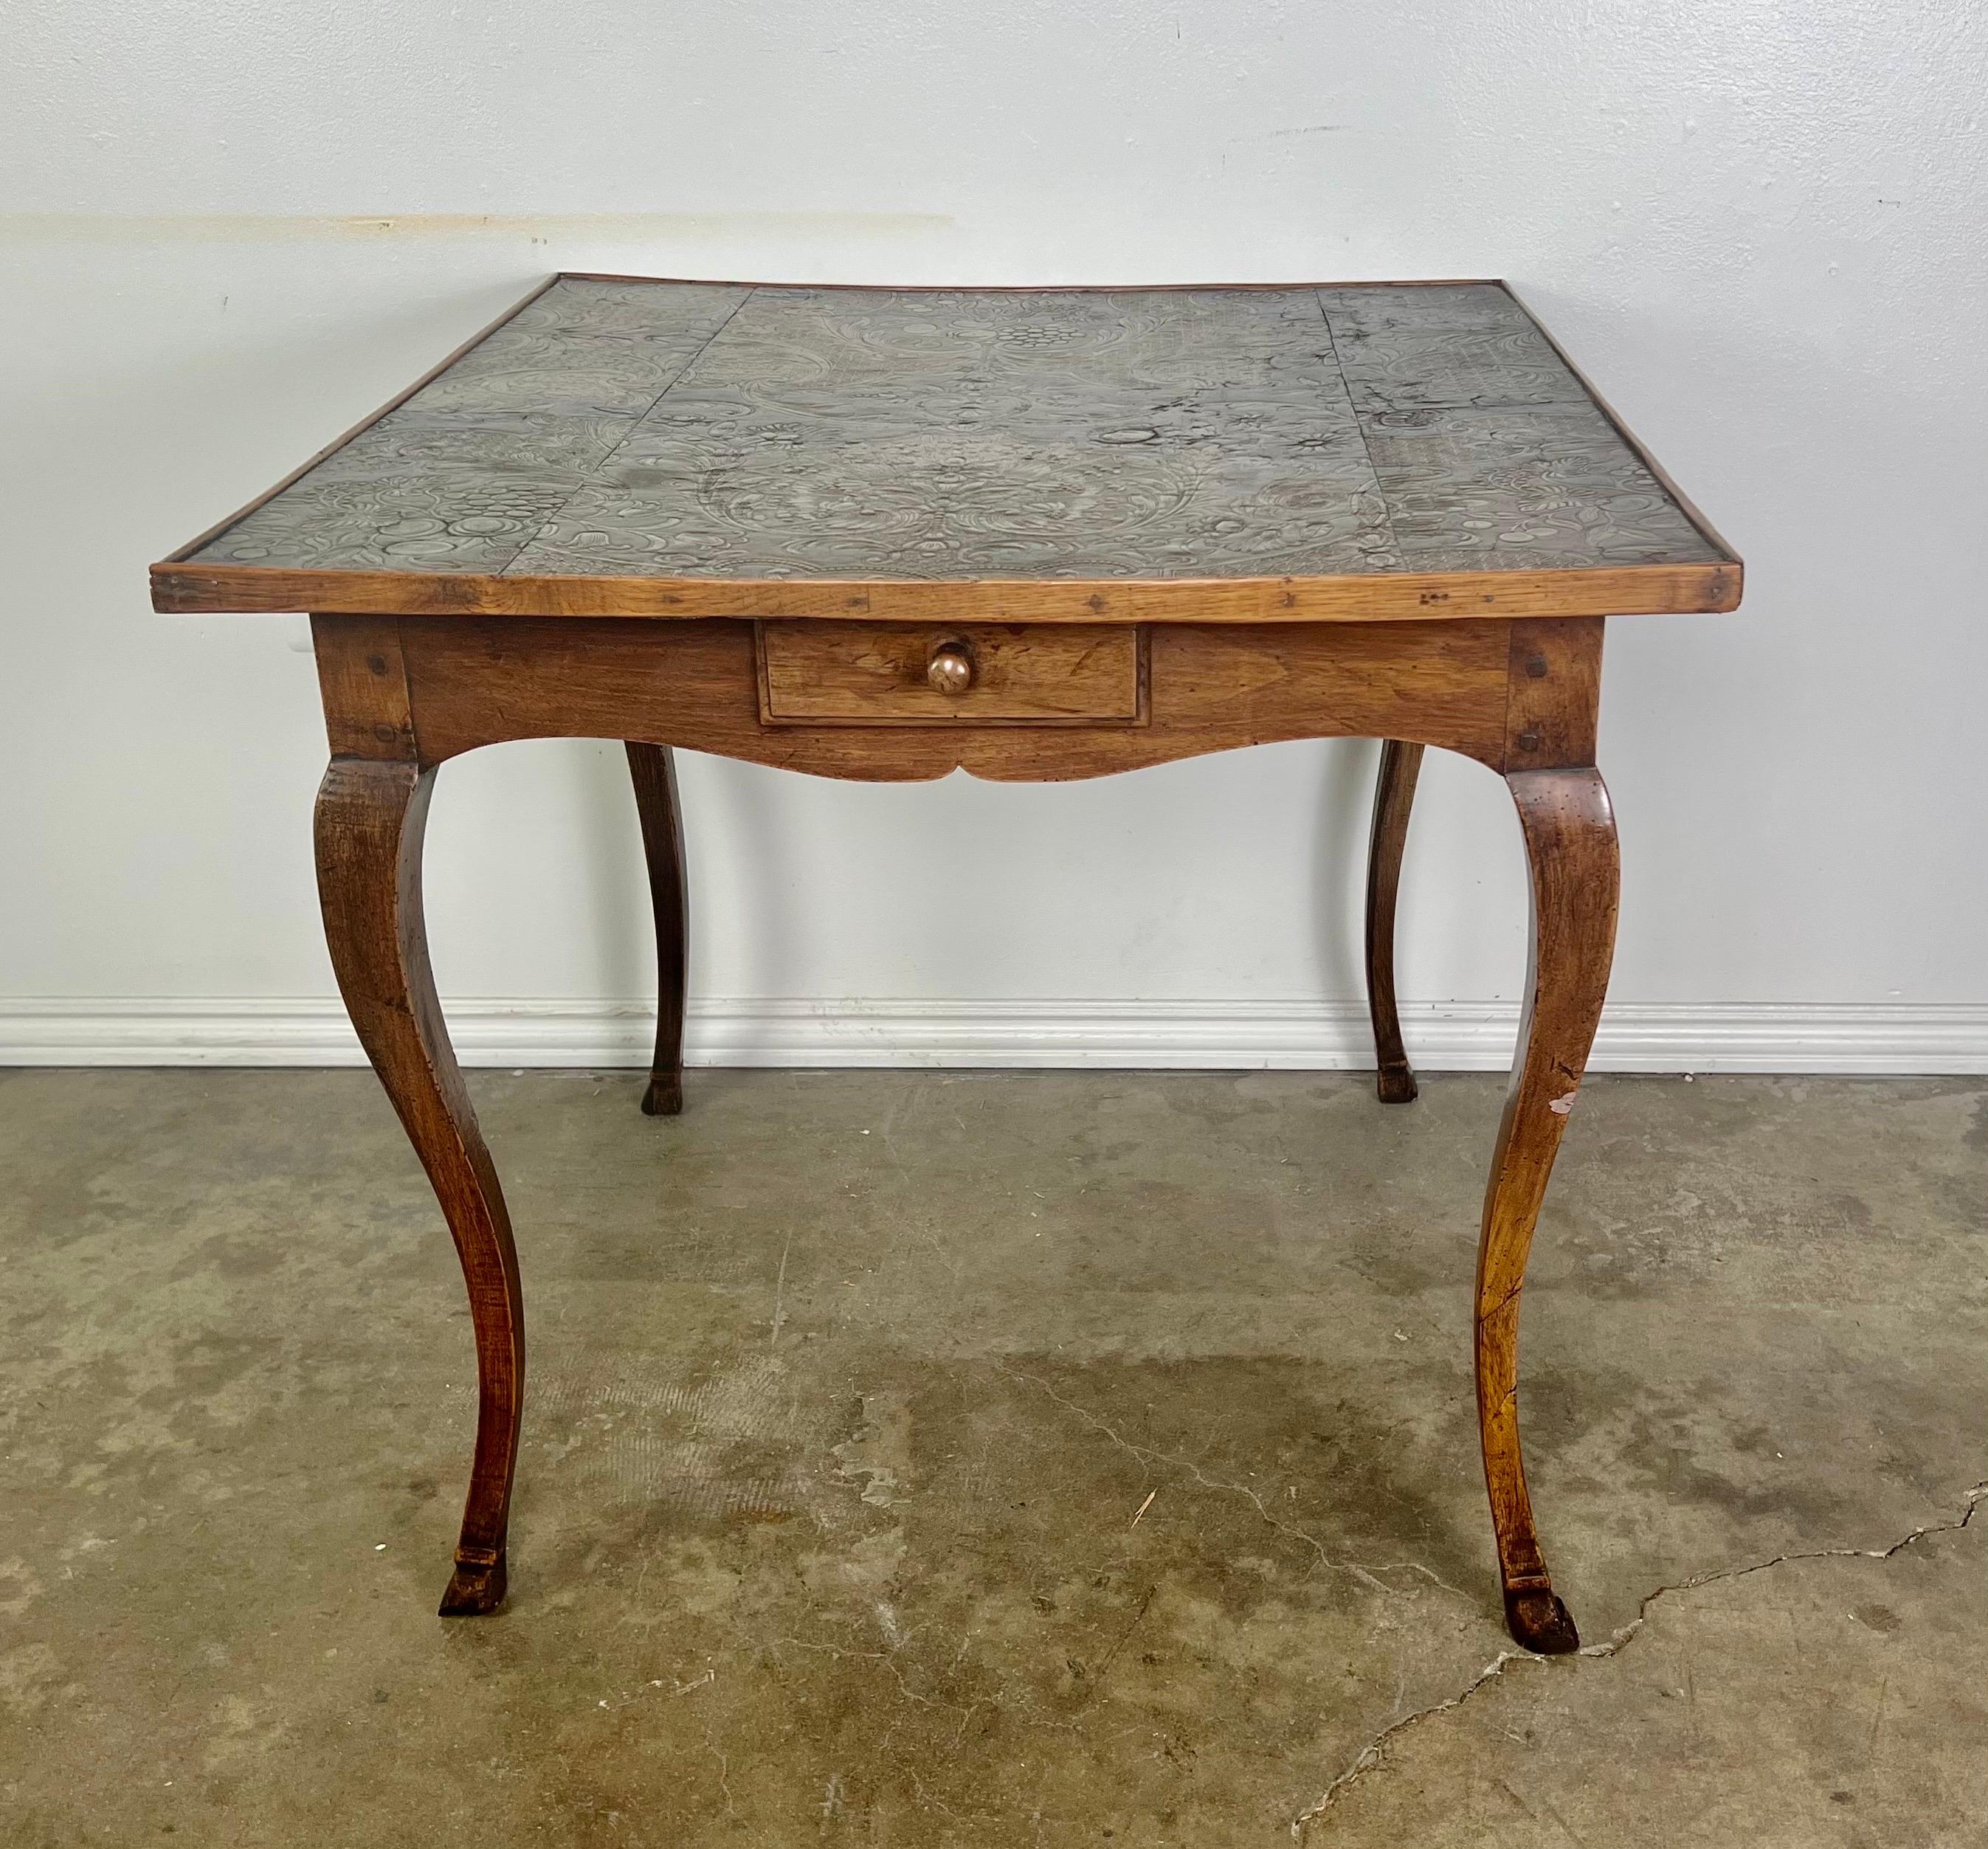 19th century French game table with four drawers ana a leather embossed top., The table stands on four cabriole legs with hoof feet.